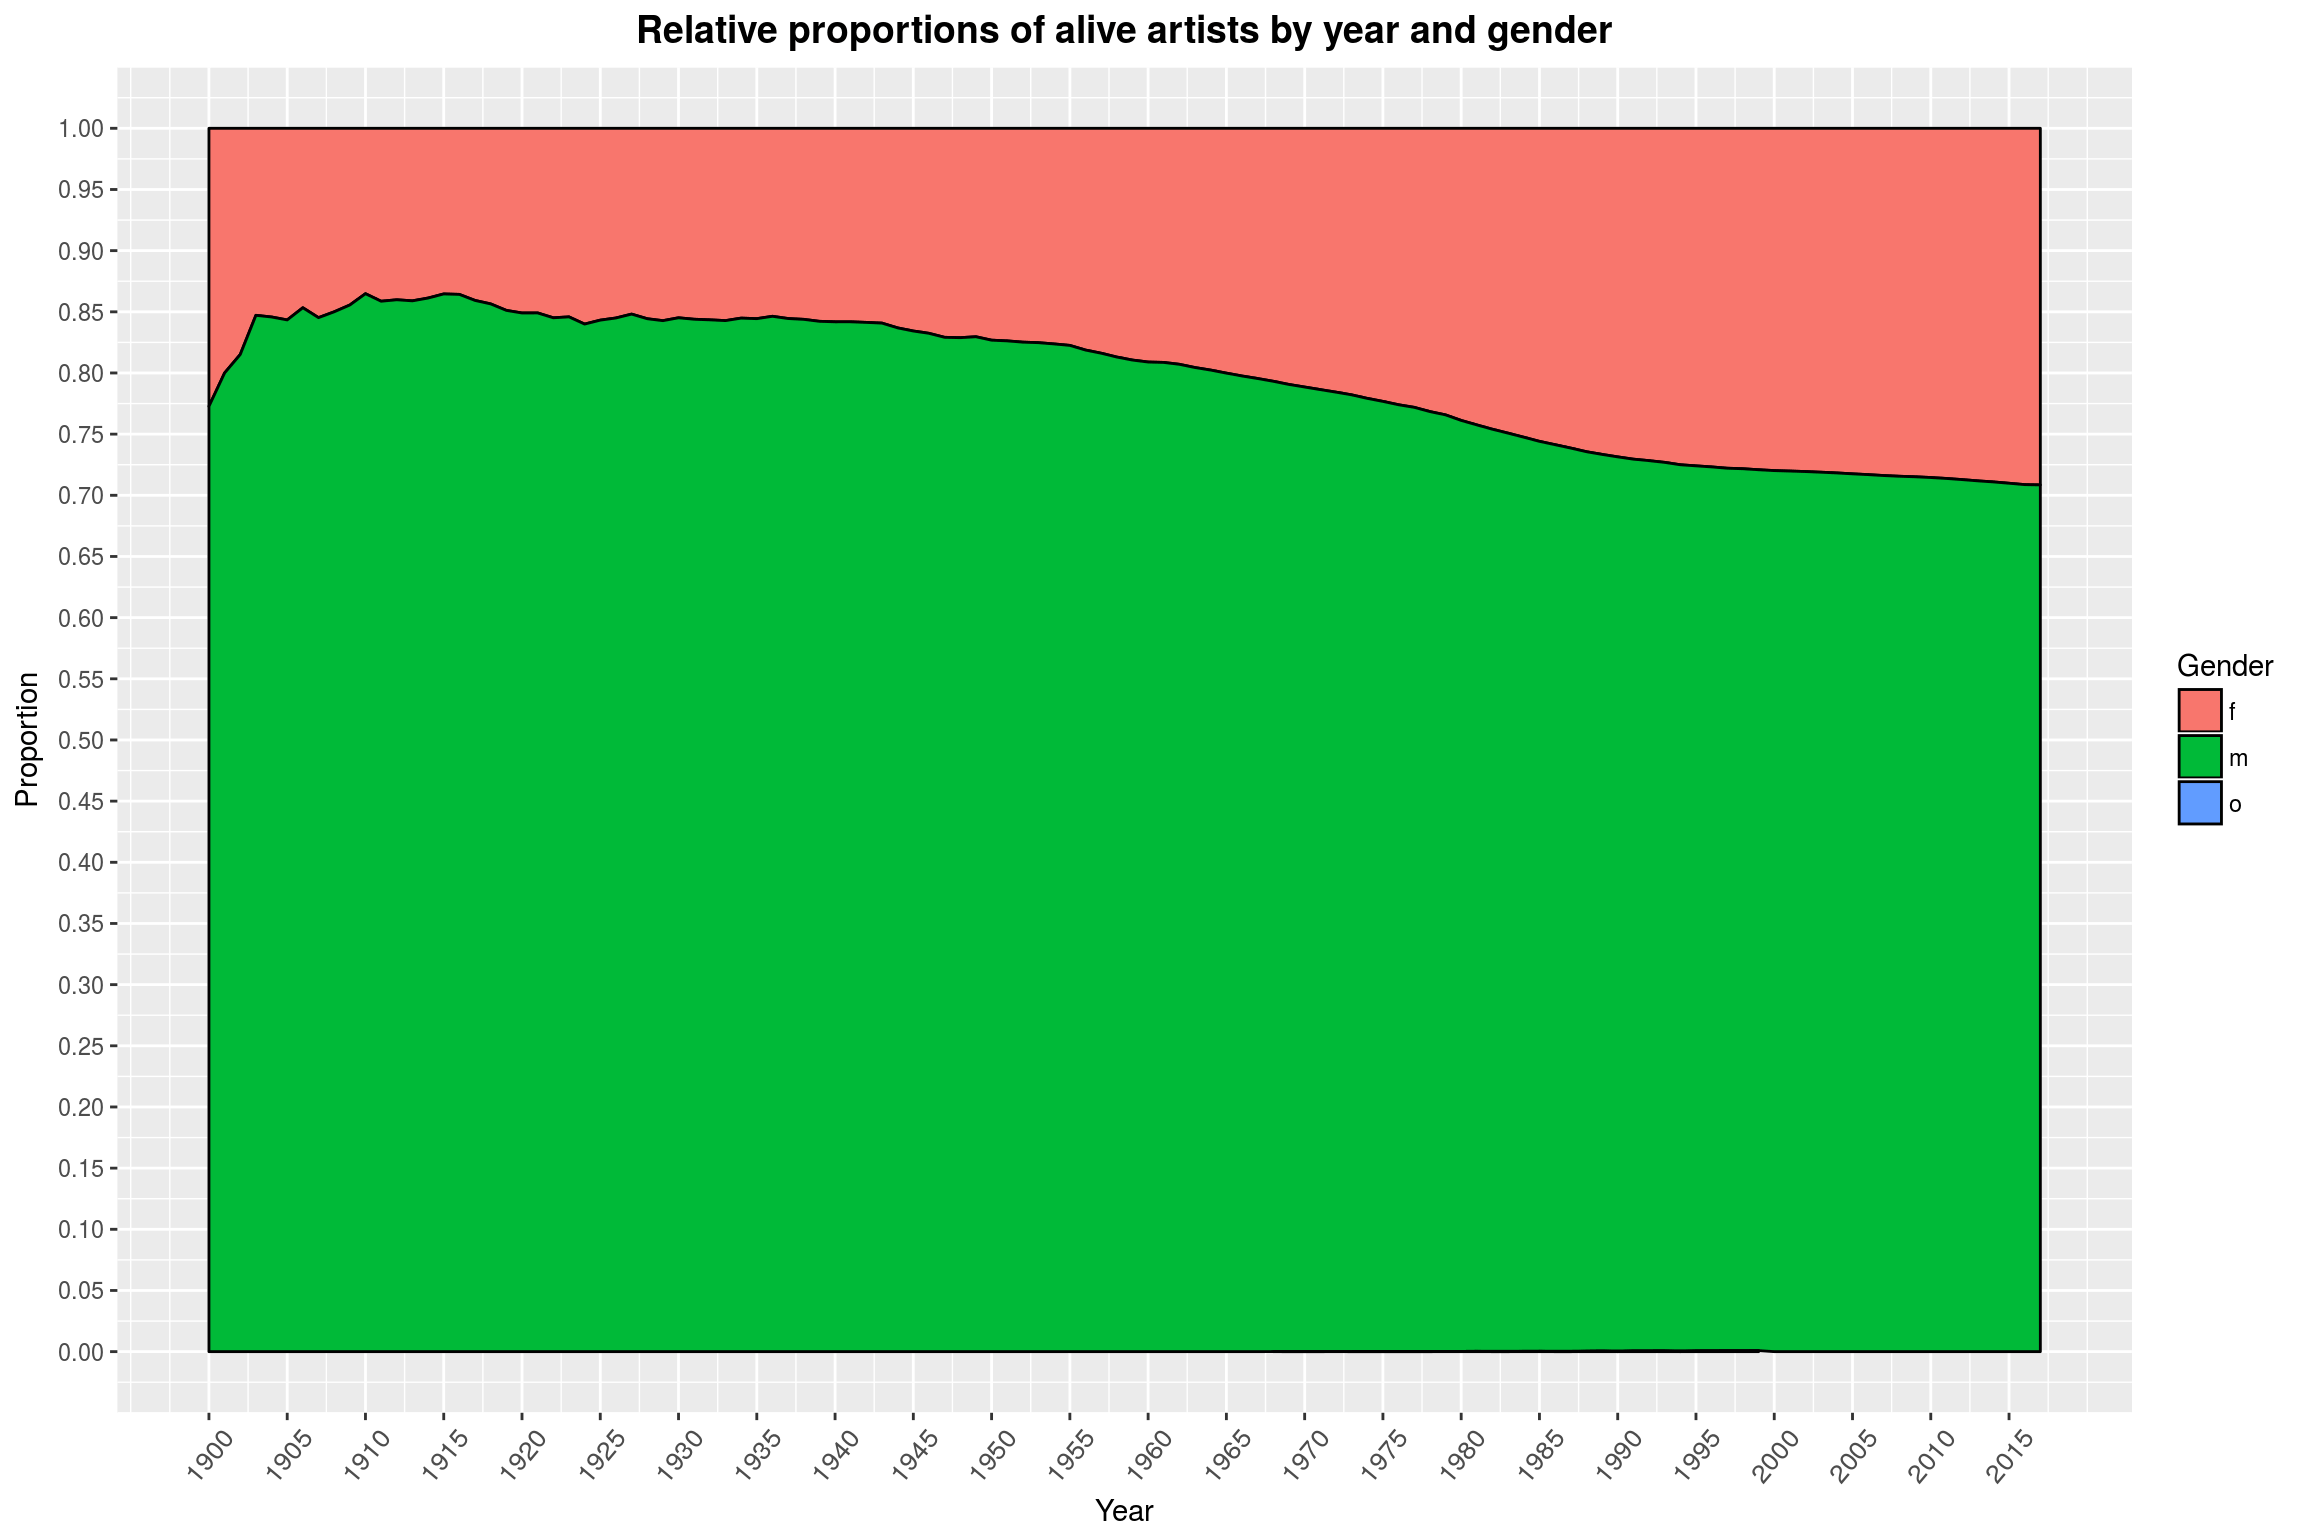 Relative proportions of alive artists by year and gender